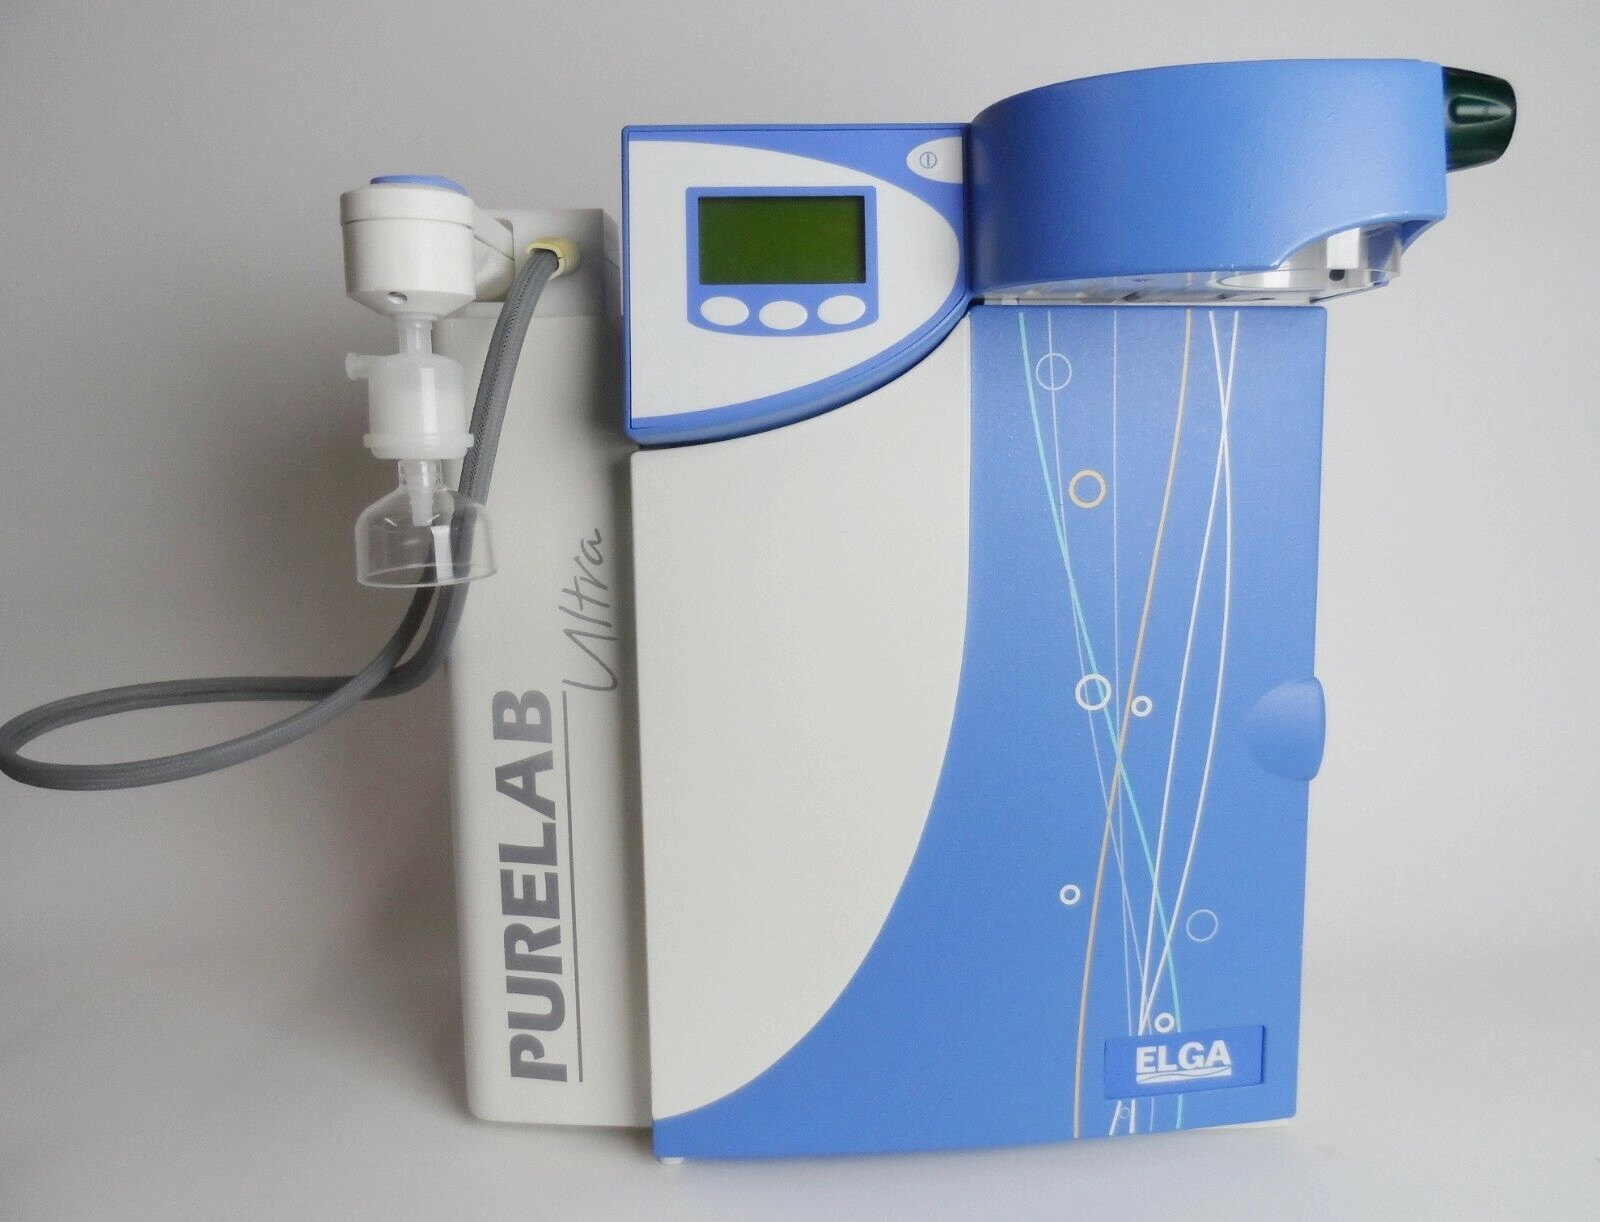 Elga Pure Lab Ultra GE MK2 Water Purification Syst